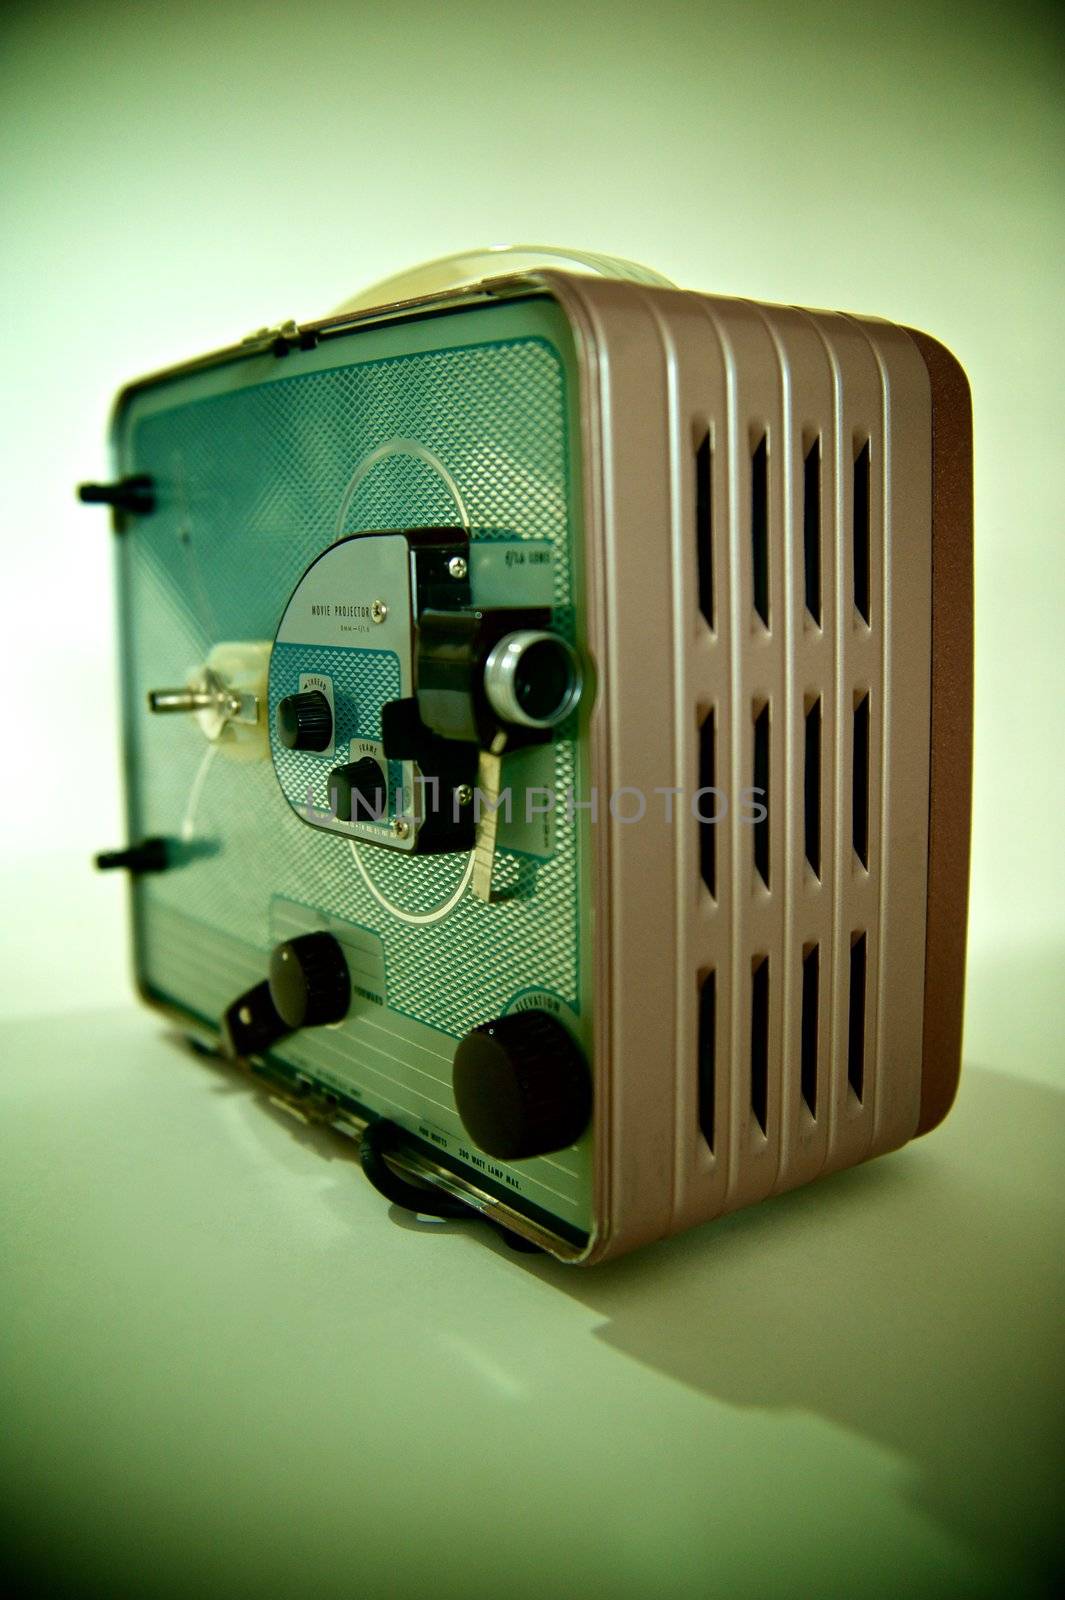 Vintage 8mm Home Movie Projector on Angle-Cross Processed by pixelsnap